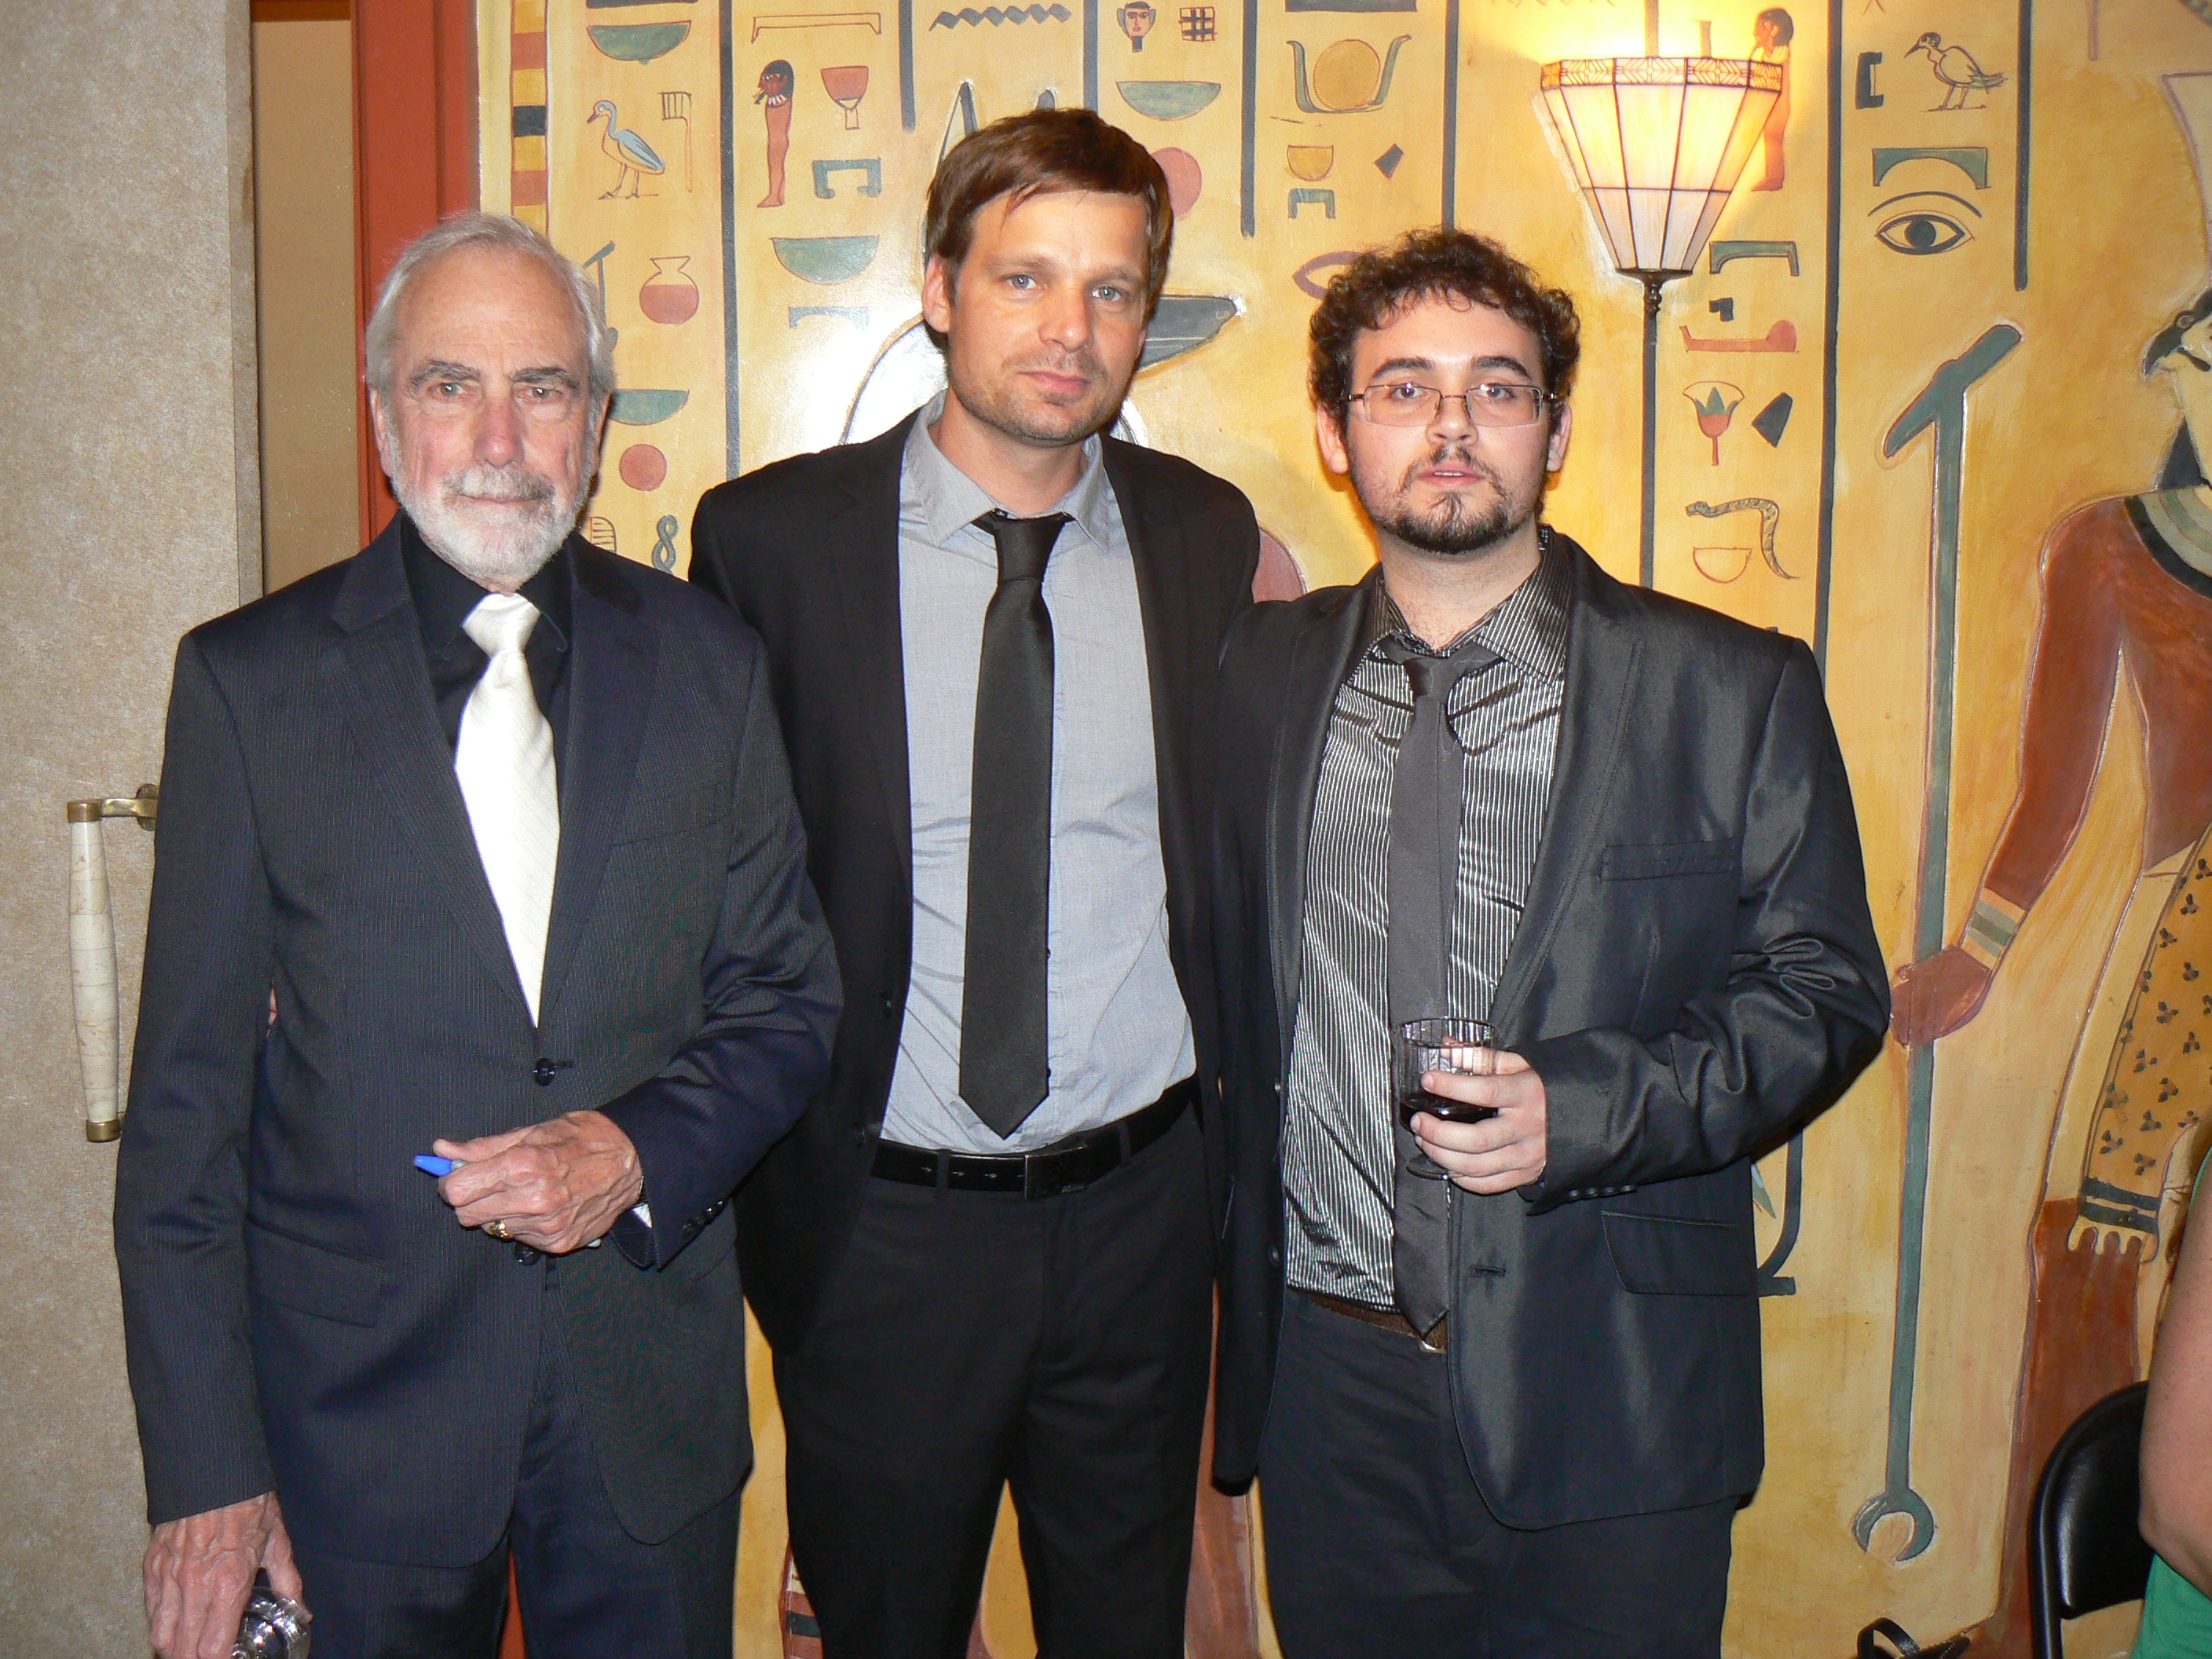 Jerry Lacy, Nathan Wilson, and Ansel Faraj at premiere of DOCTOR MABUSE: ETIOPOMAR (2014)